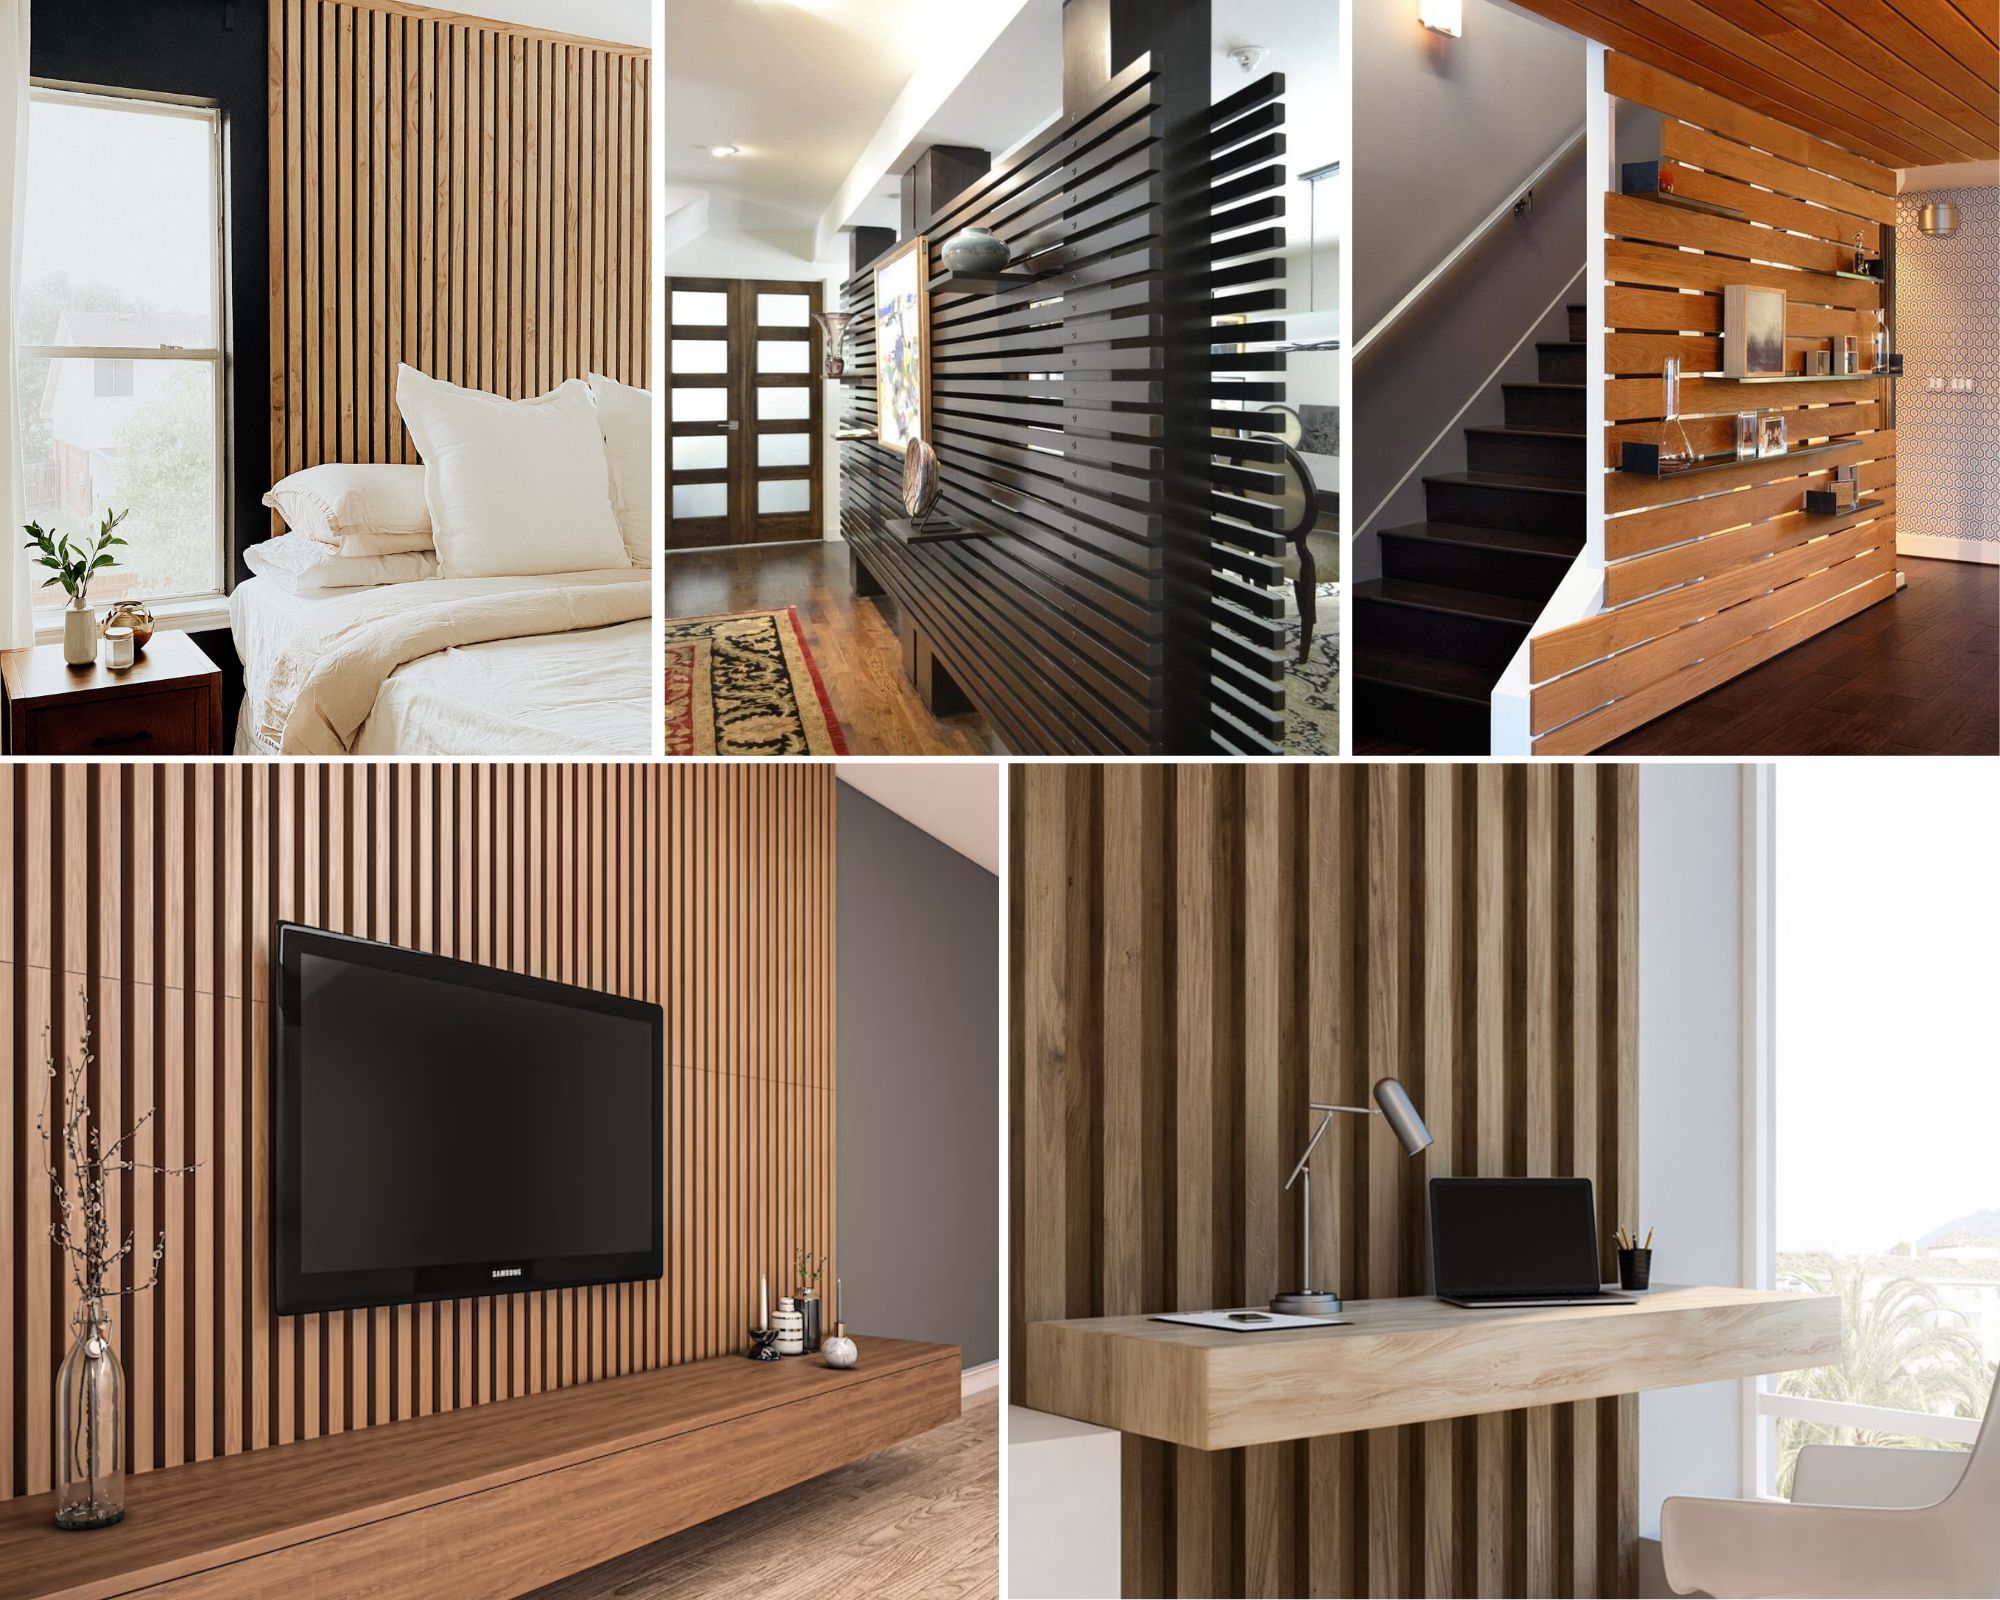 DIY Wood Slat Wall Ideas Easy To Transform Your Space into More Beautiful